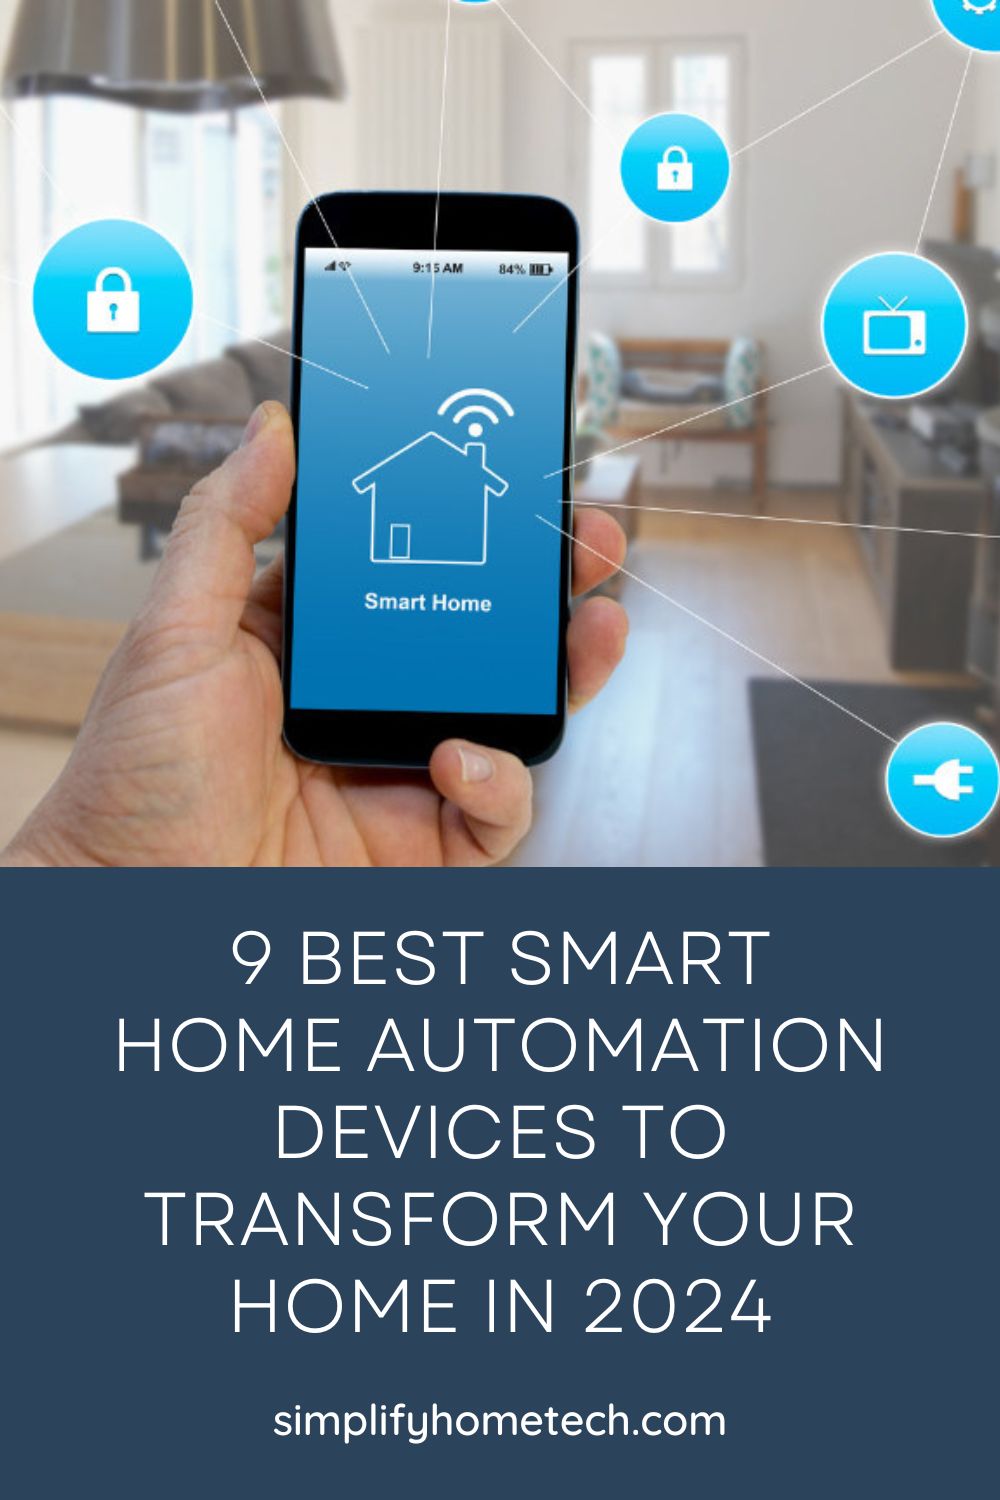 Best Smart Home Automation Devices